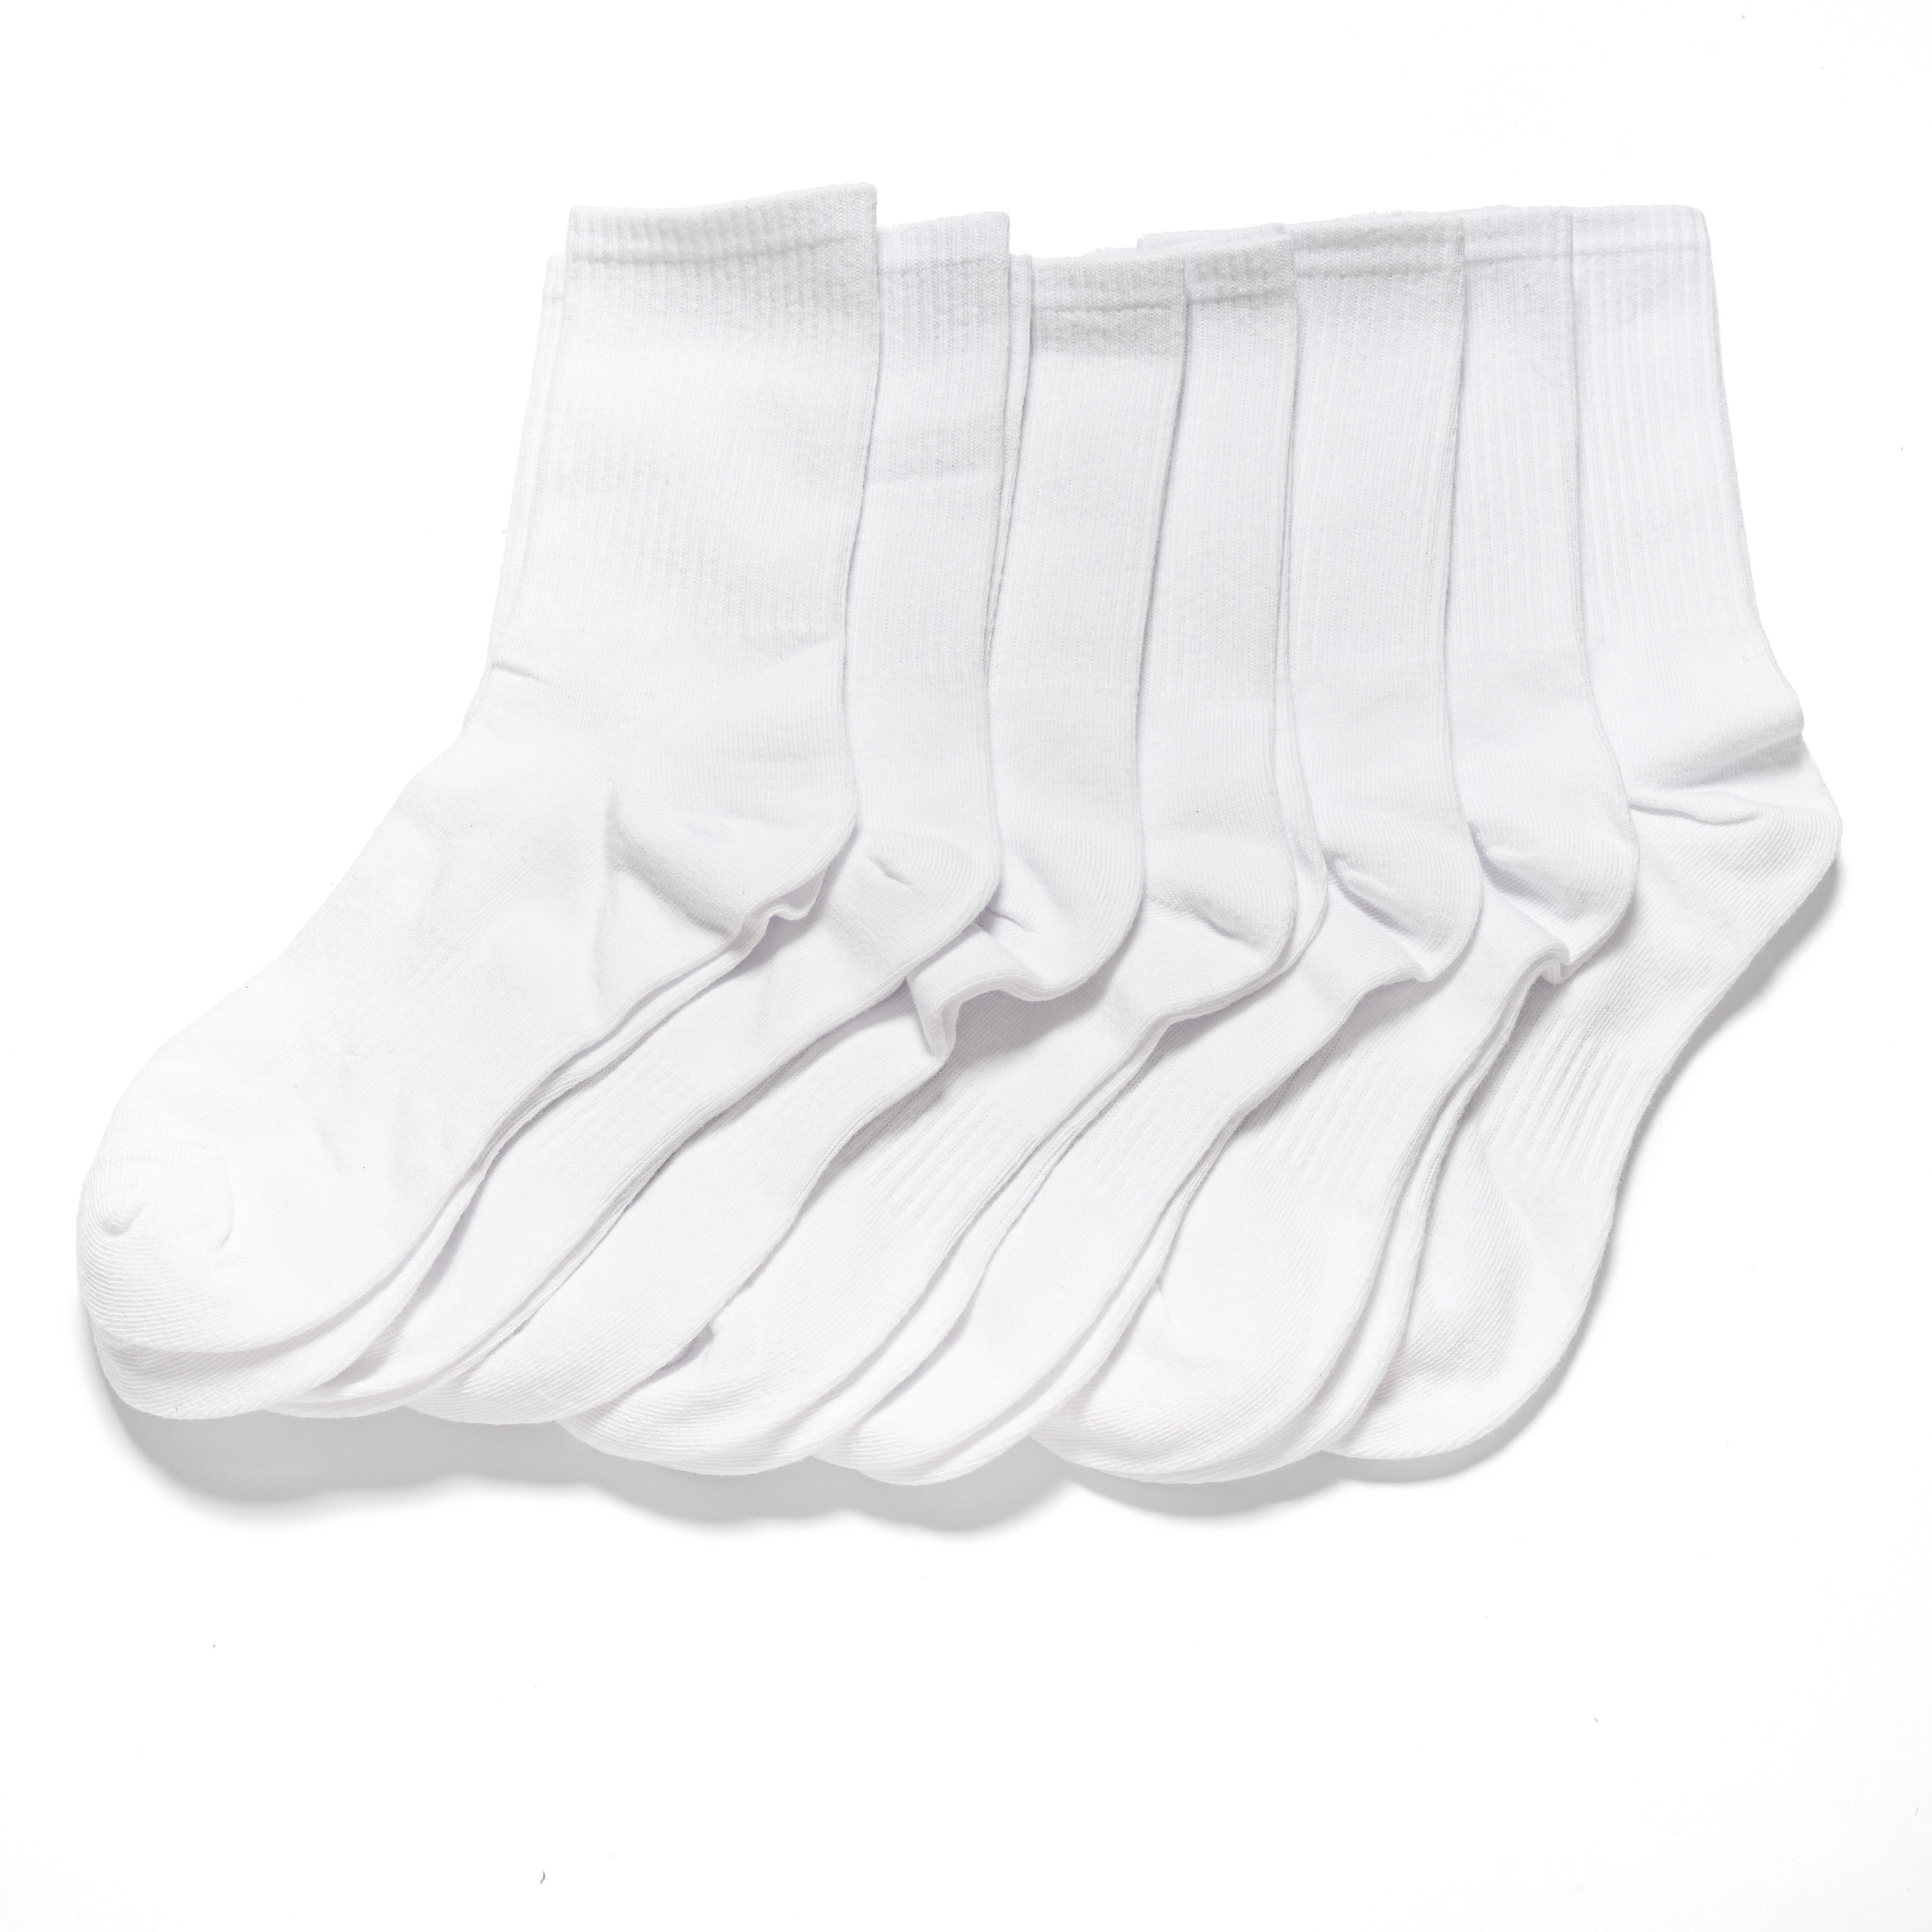 31 Pairs of Low Cotton High Ankle Men's Socks - New Socks Daily